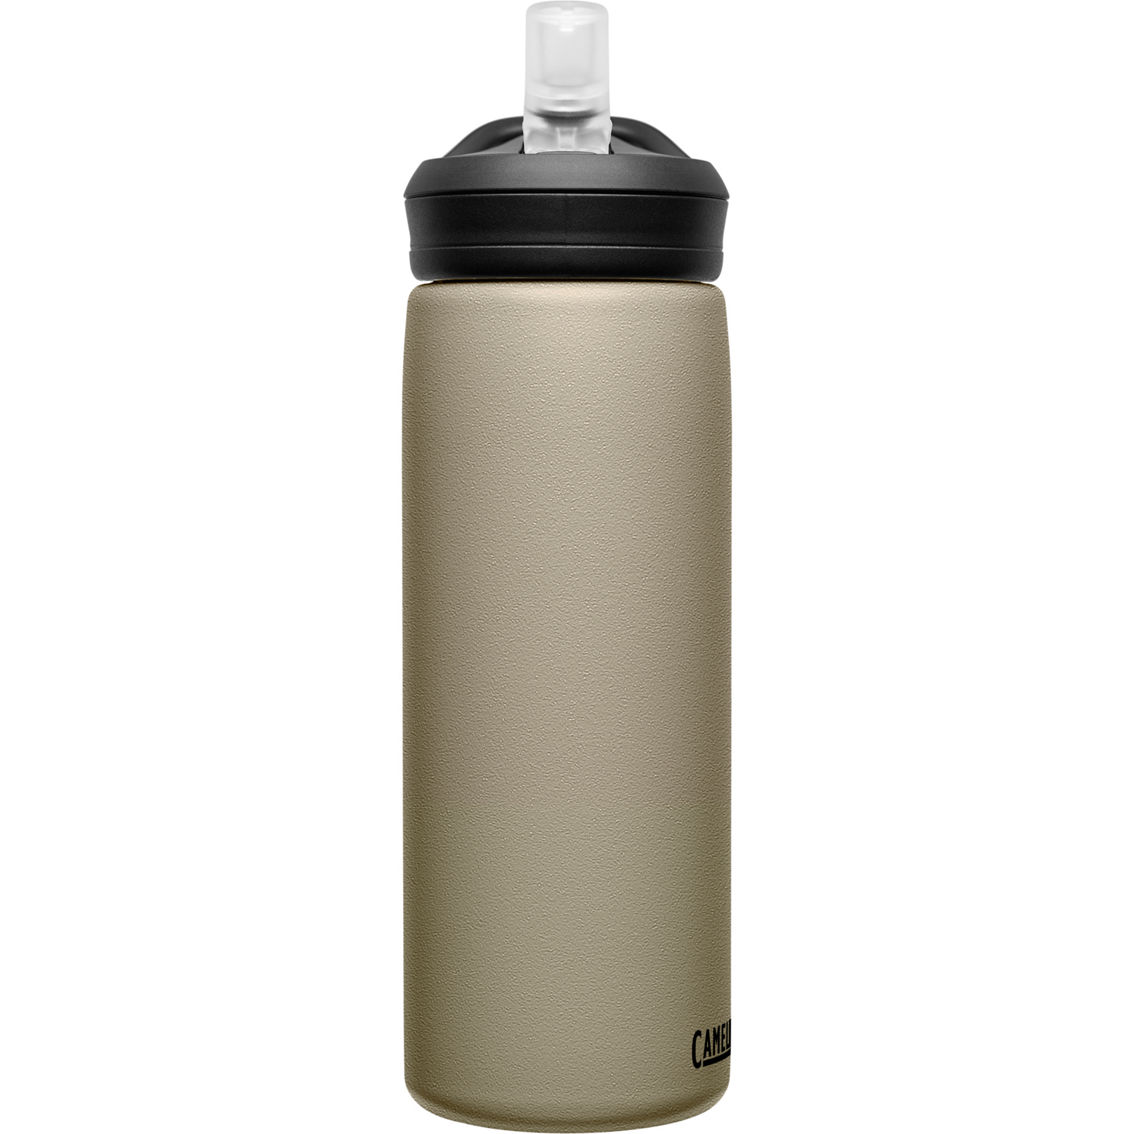 Camelbak Eddy+ Insulated Stainless Steel Water Bottle - Image 3 of 4